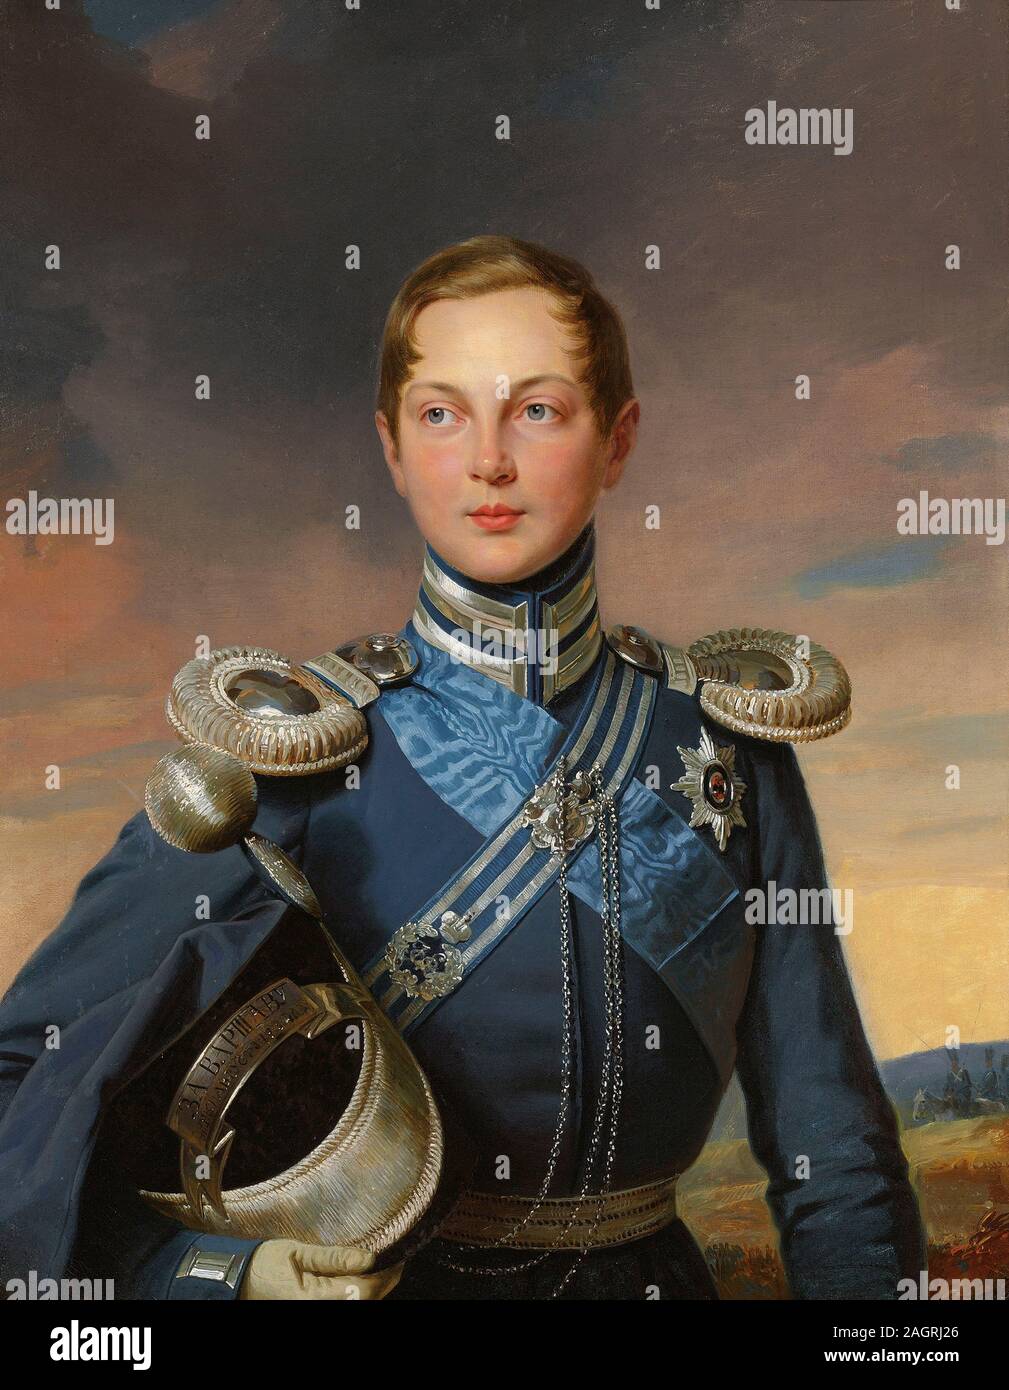 Portrait of Tsarevich Alexander Nikolaevich of Russia (1818-1881). Museum: PRIVATE COLLECTION. Author: Joseph Karl Stieler. Stock Photo